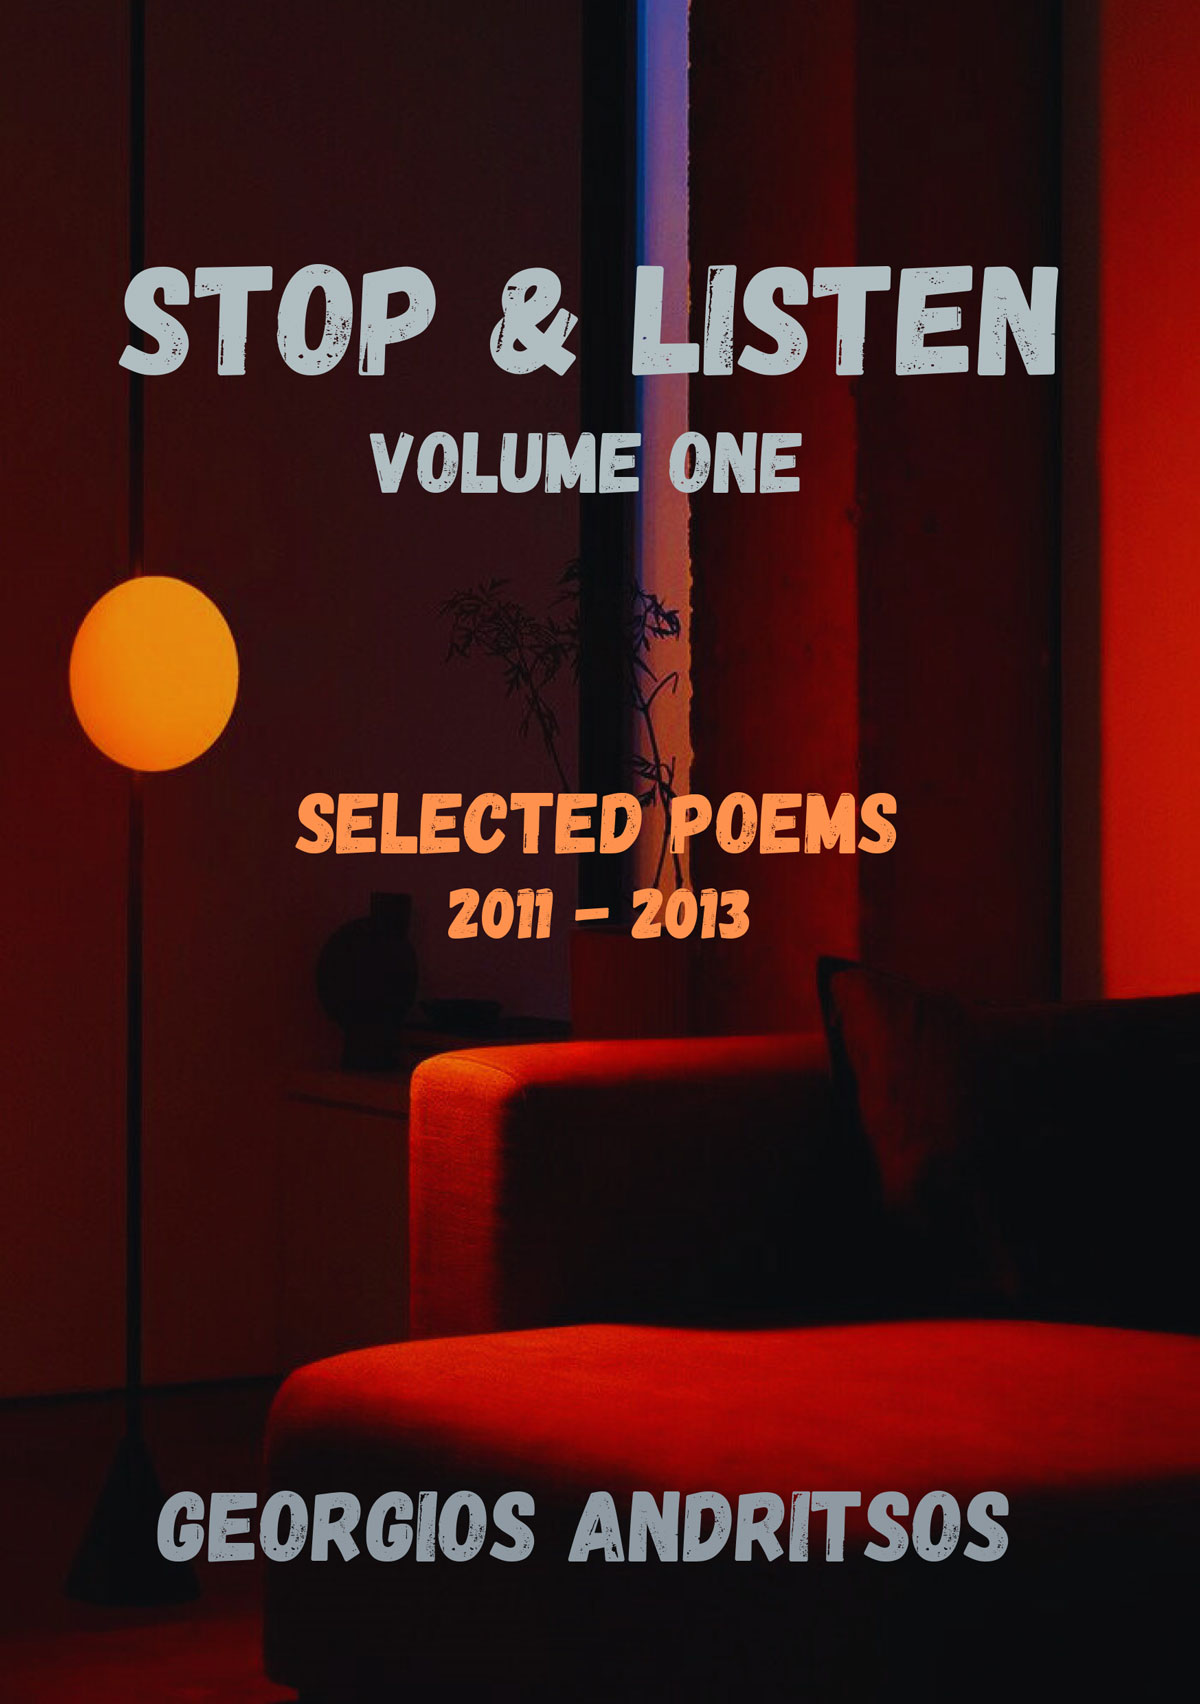 Stop & Listen Vol. 1 - Selected Poems 2011 - 2013